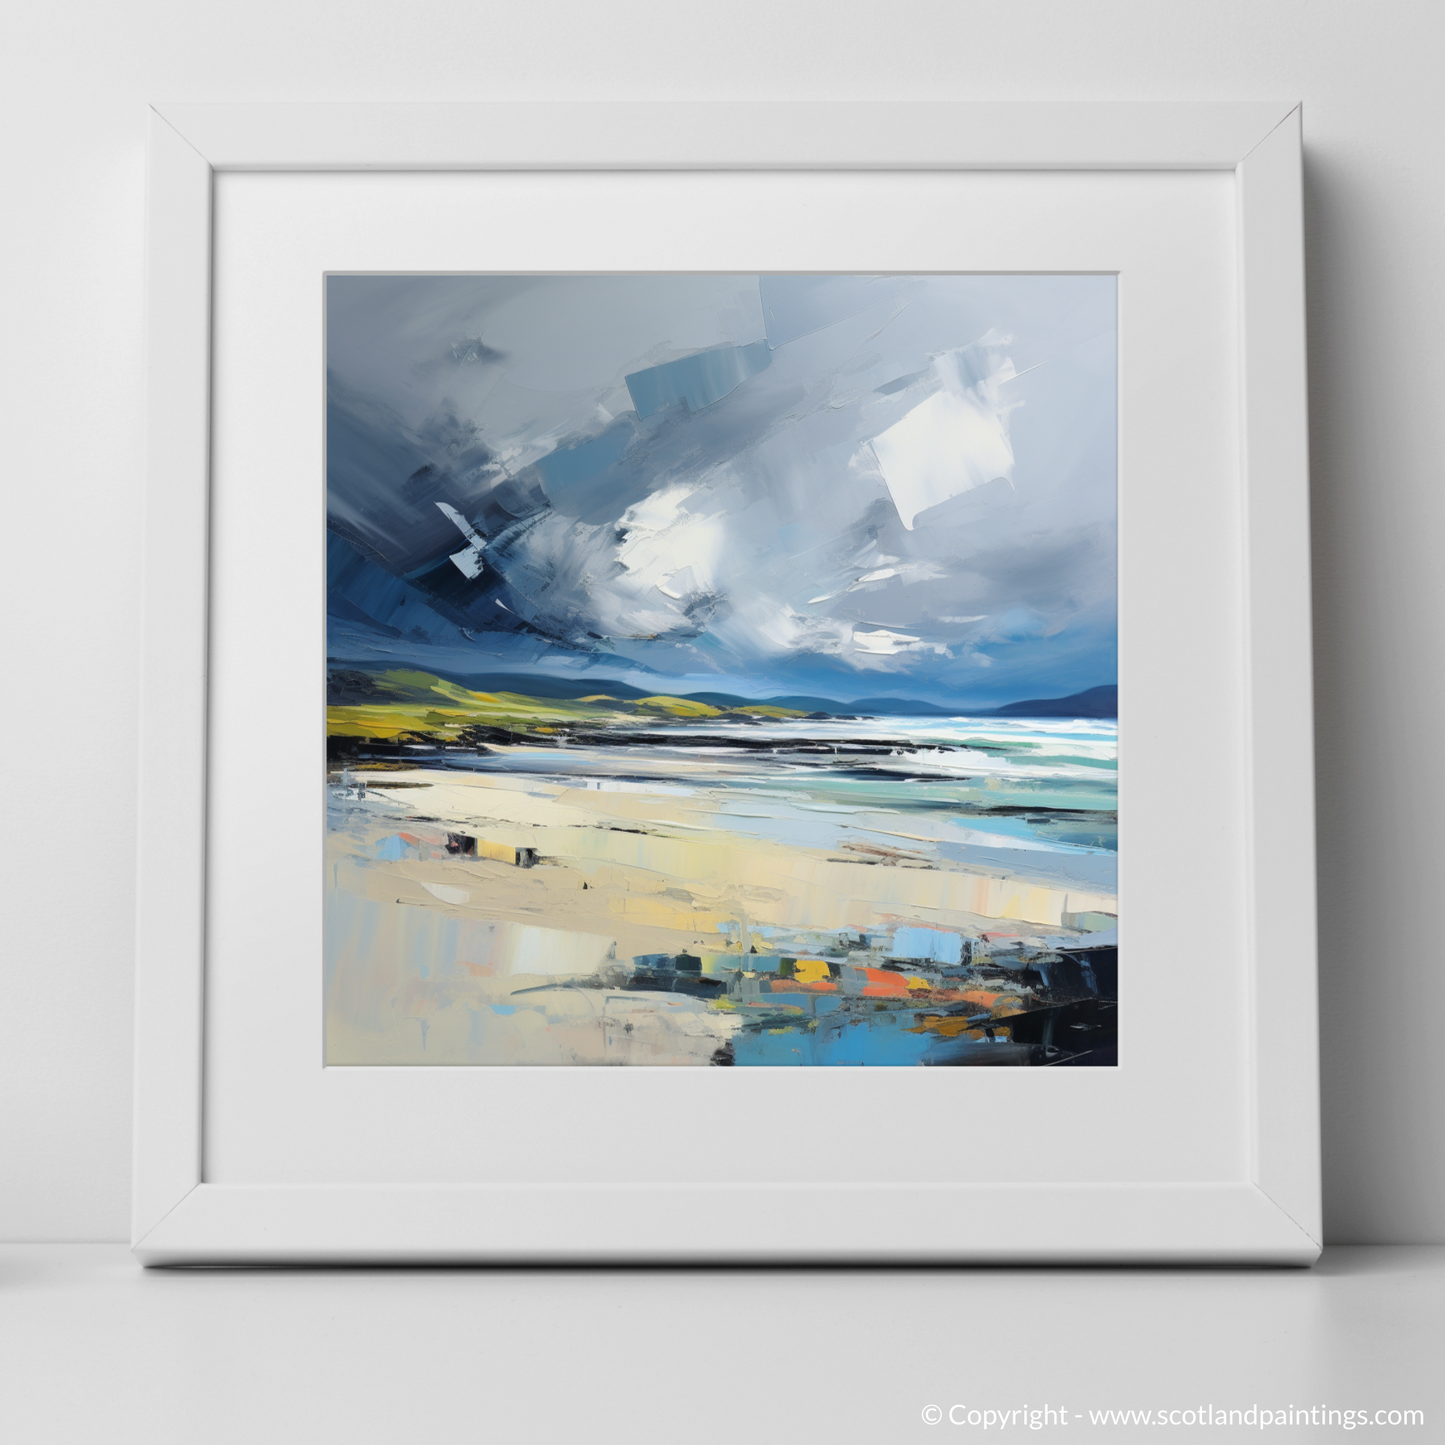 Art Print of Scarista Beach with a stormy sky with a white frame